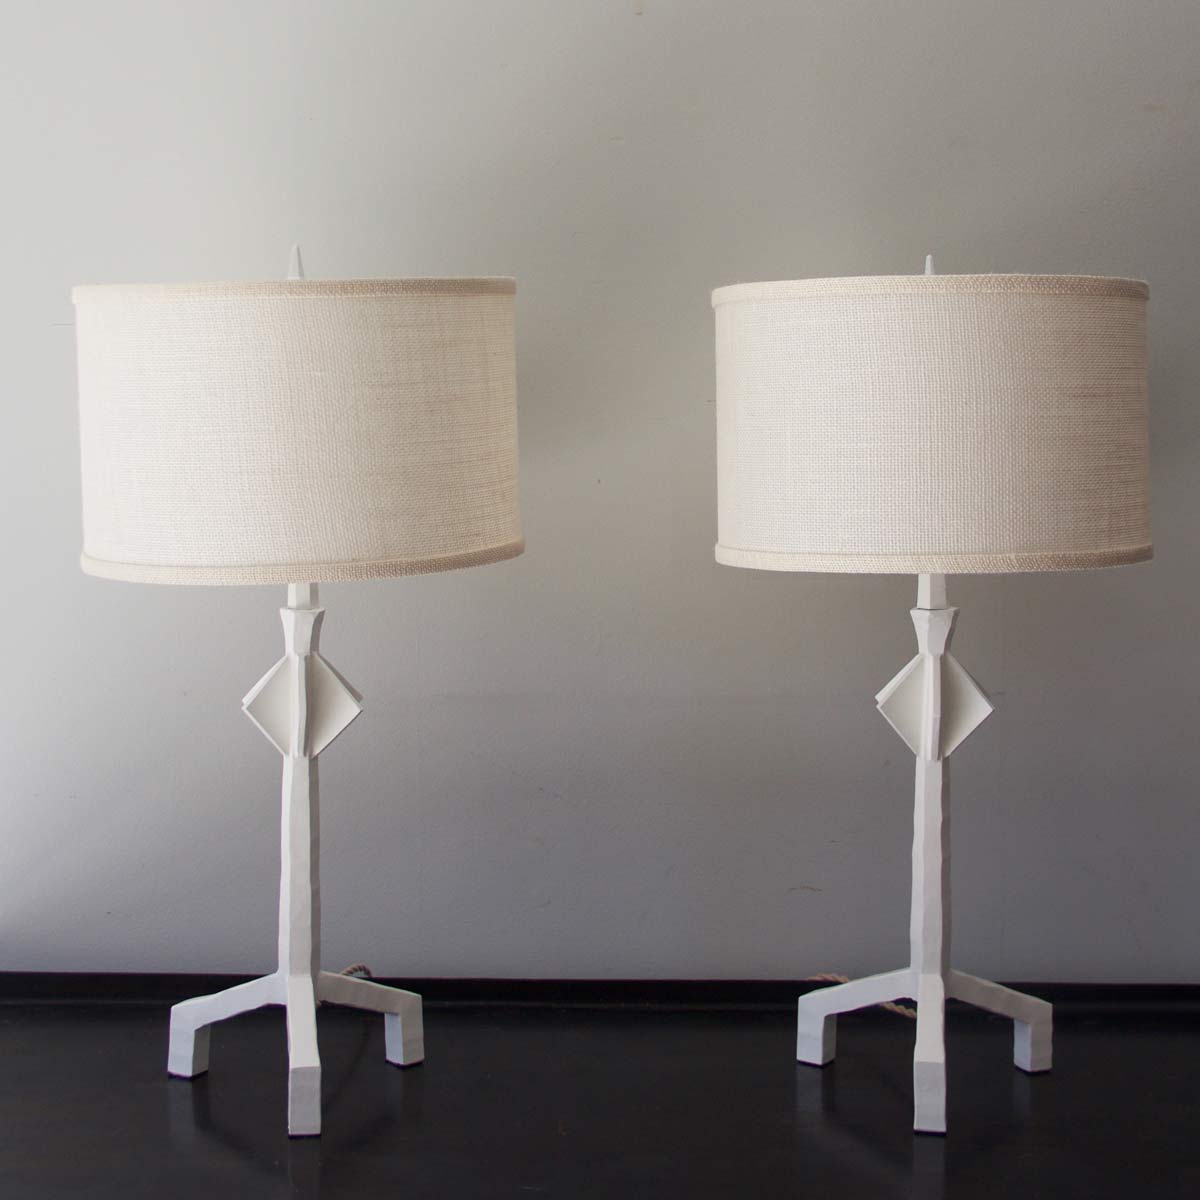 Gesso-White Painted Hand Forged Steel Etoile Style Table Lamps, each $1,200, RT Facts